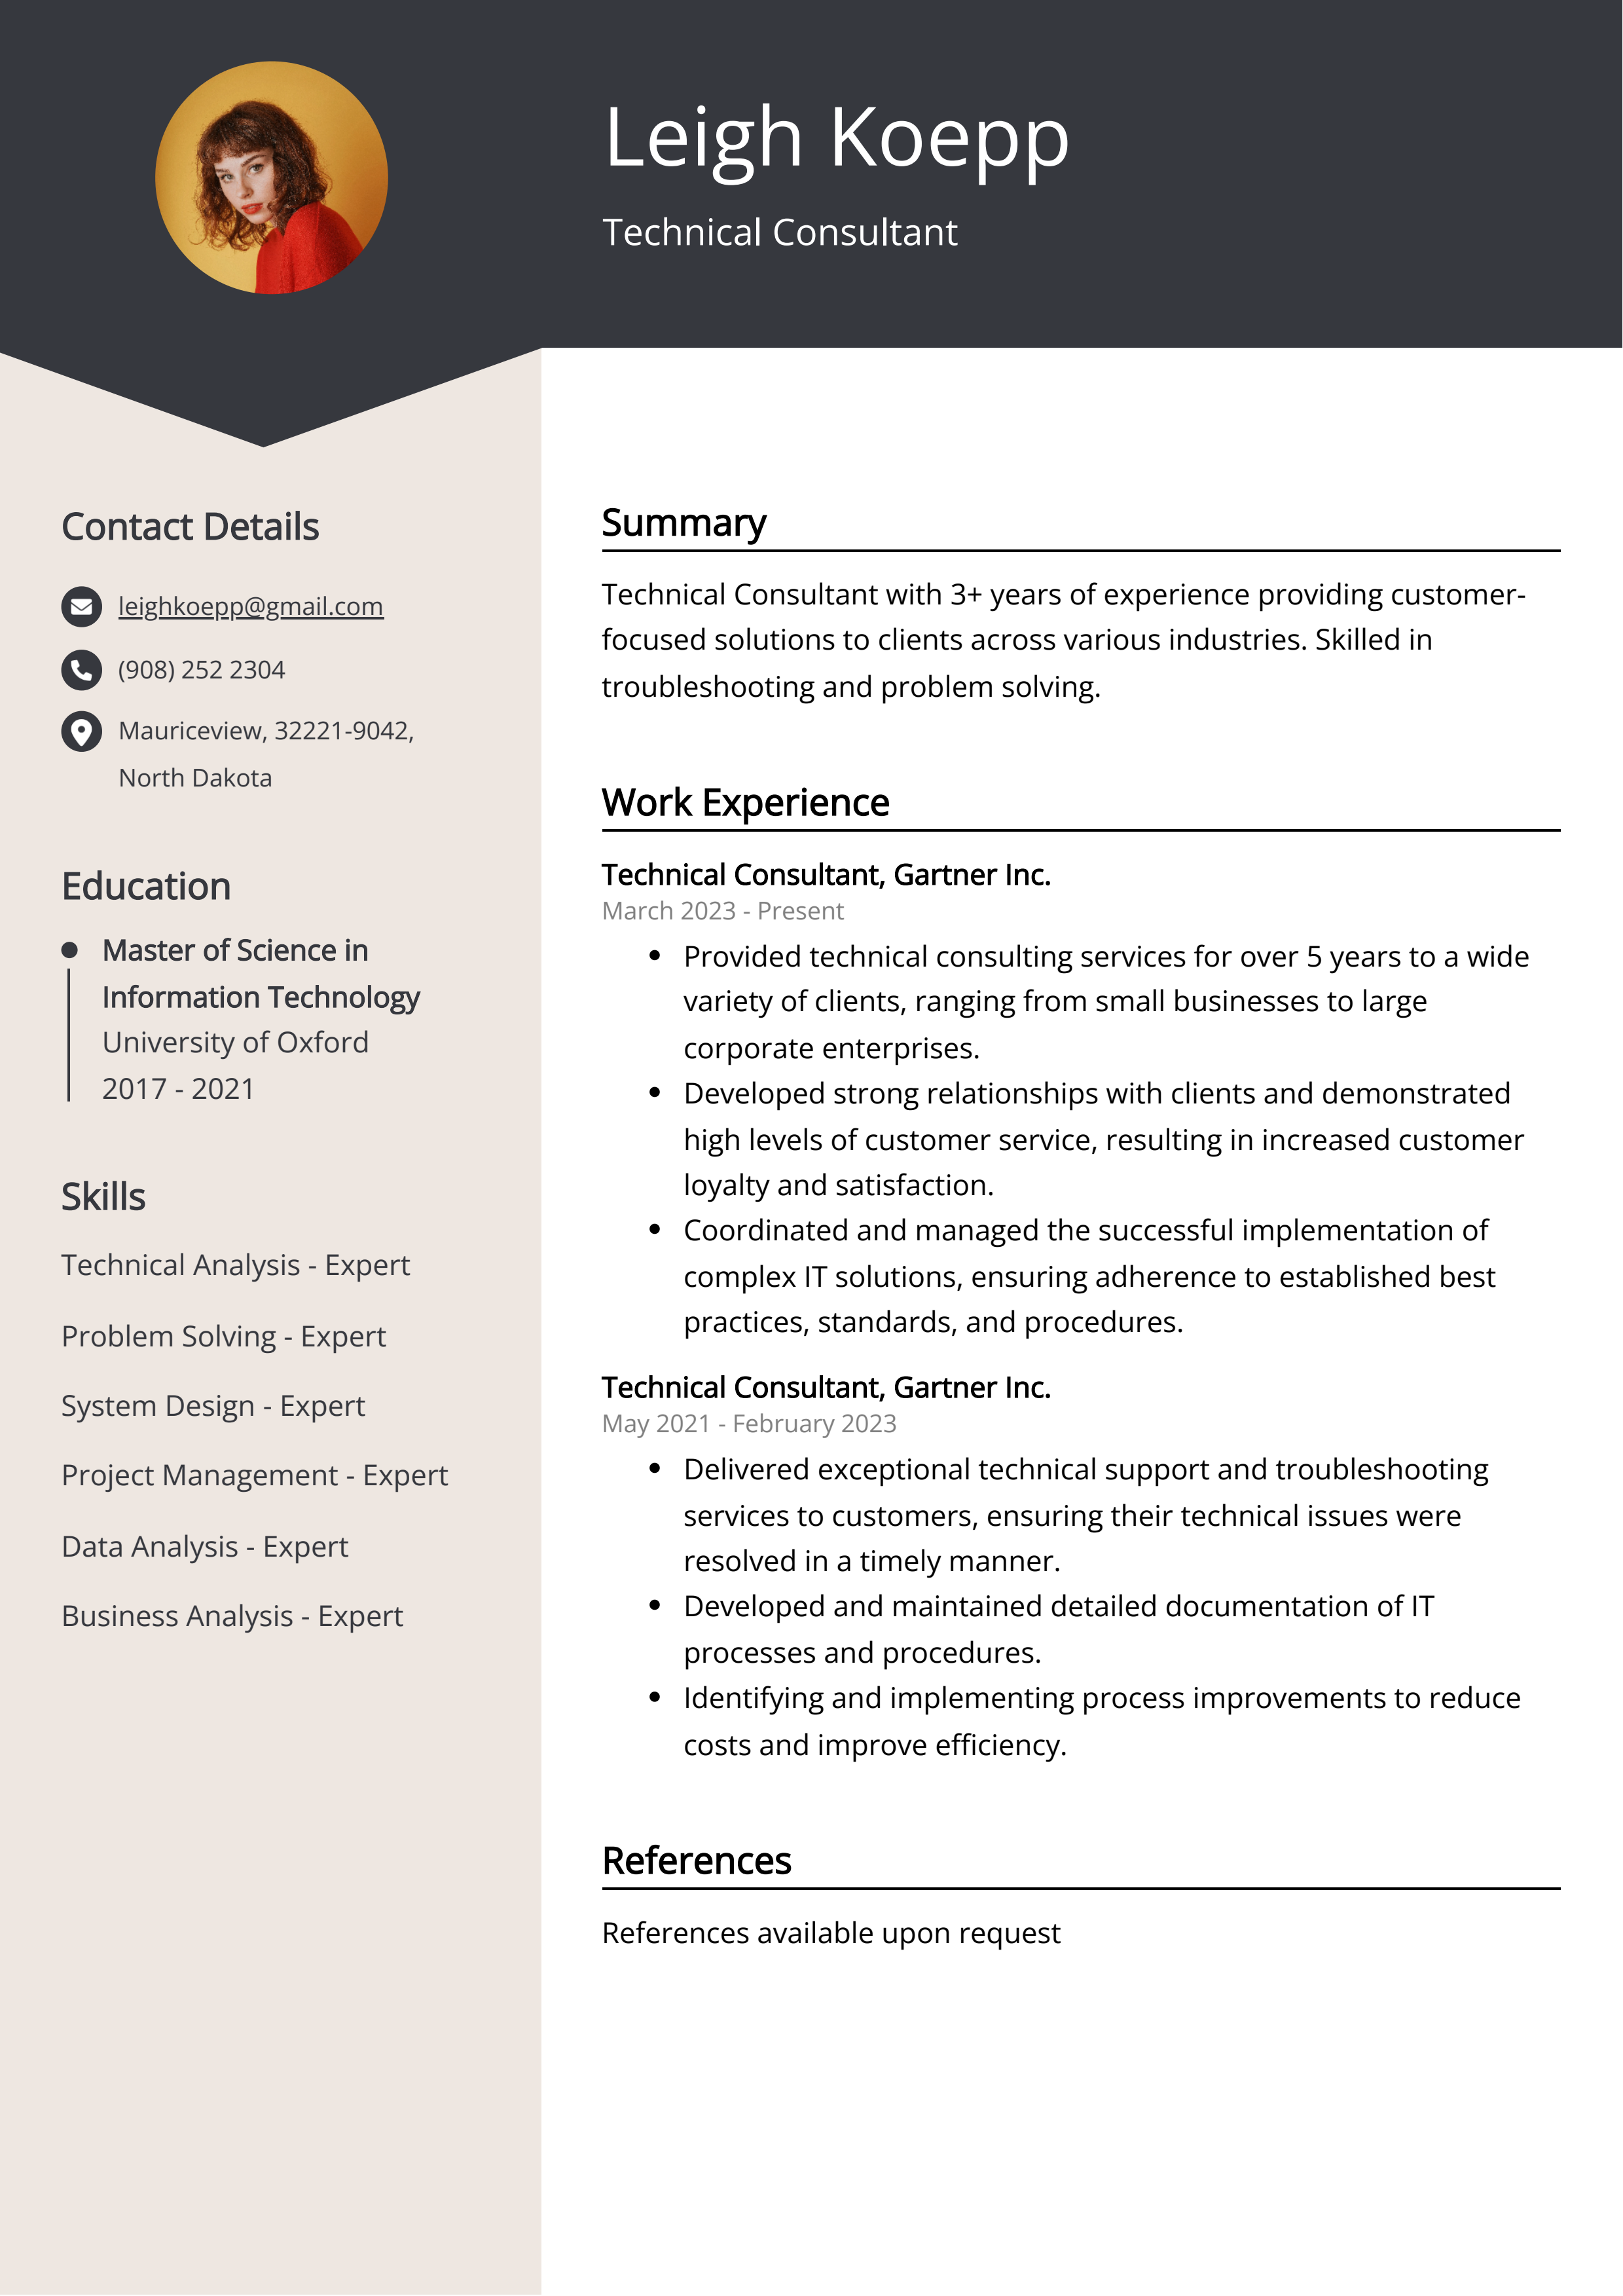 Technical Consultant CV Example